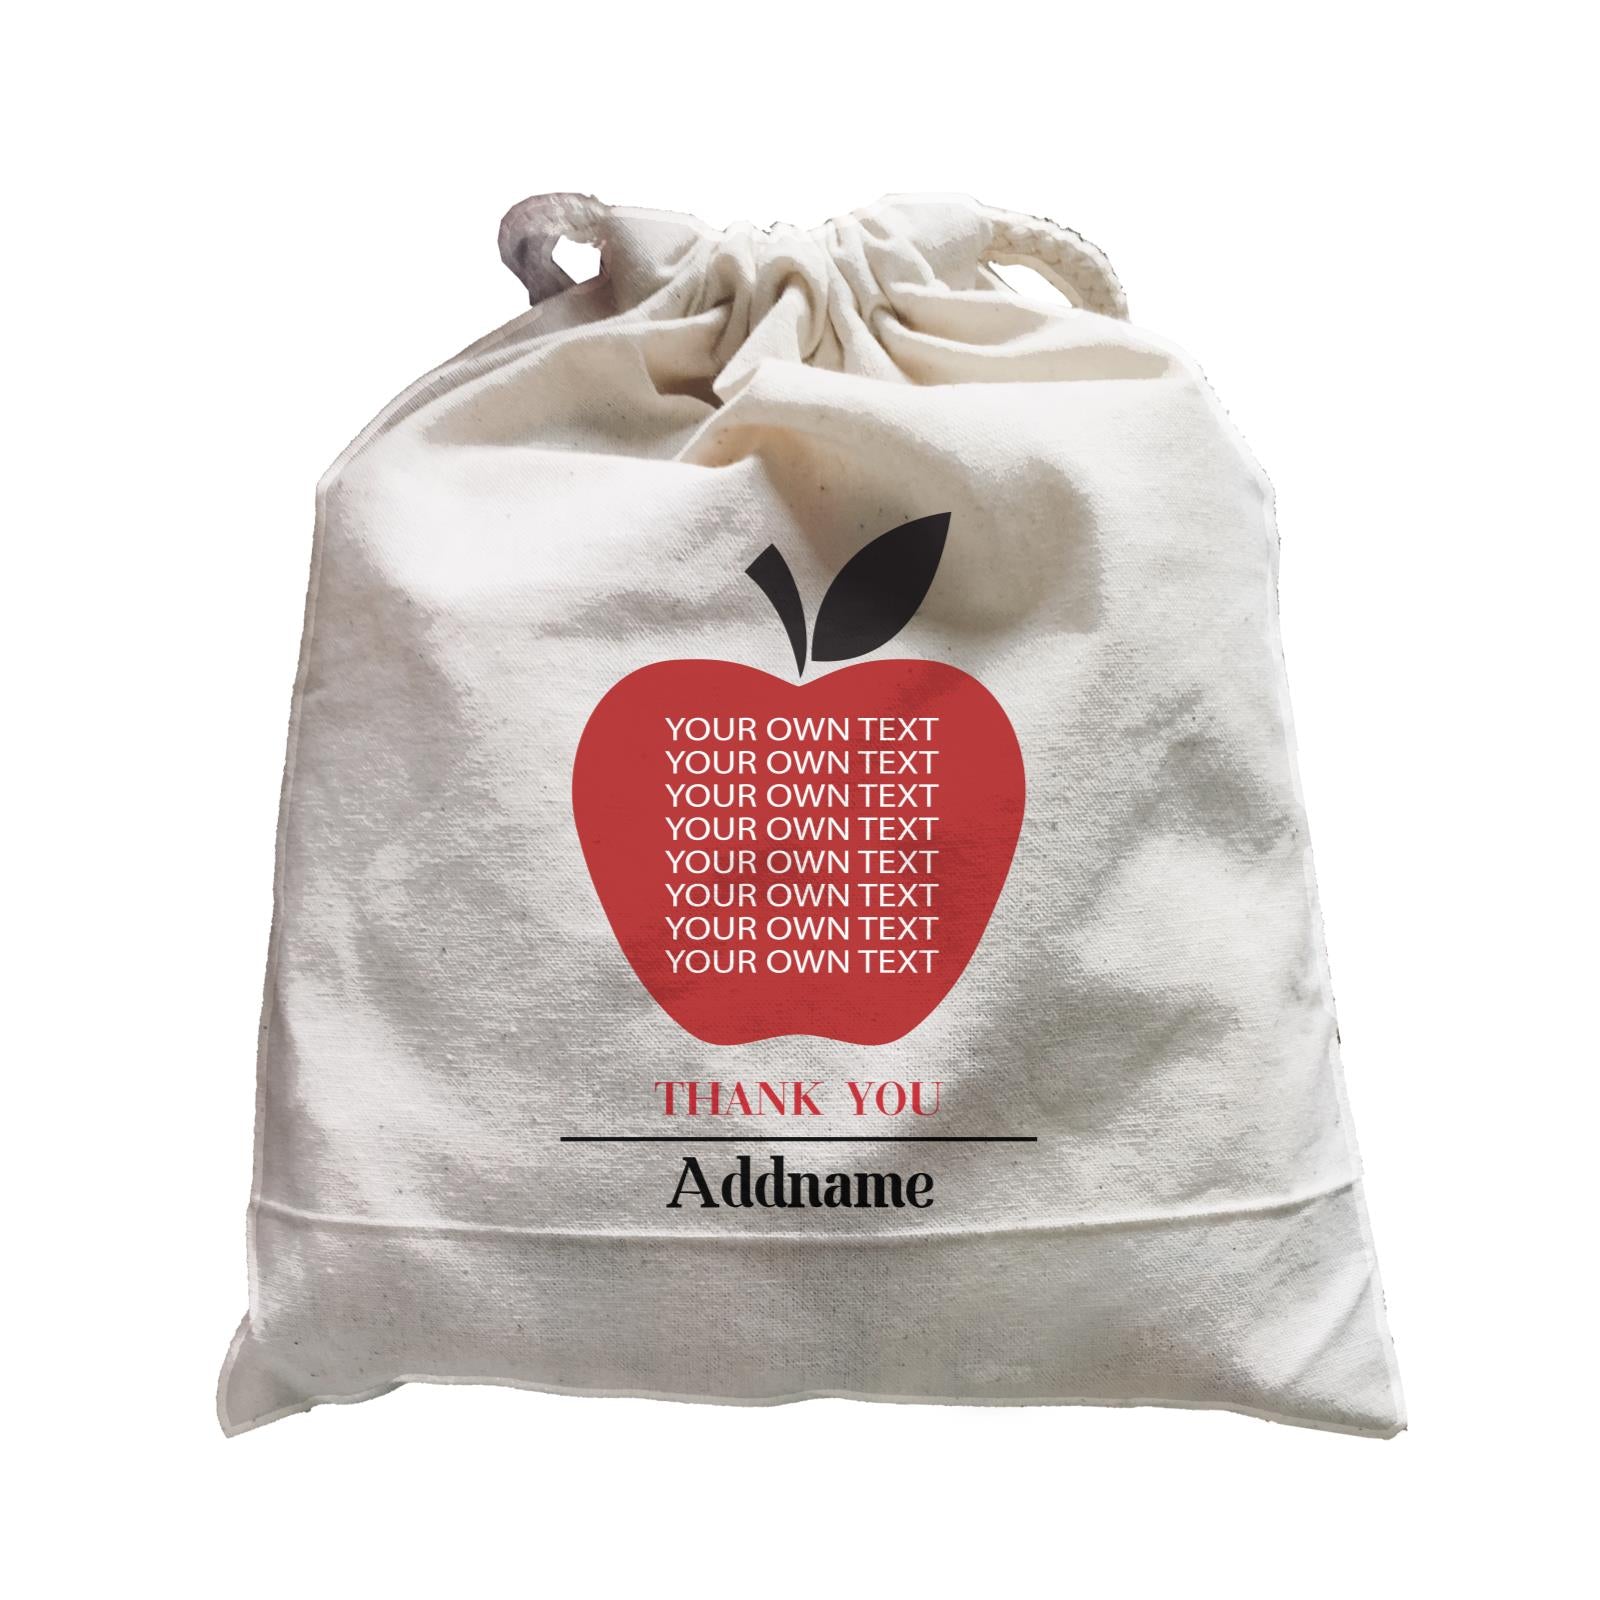 Teacher Addname Big Red Apple Thank You Addname & Add Text Satchel